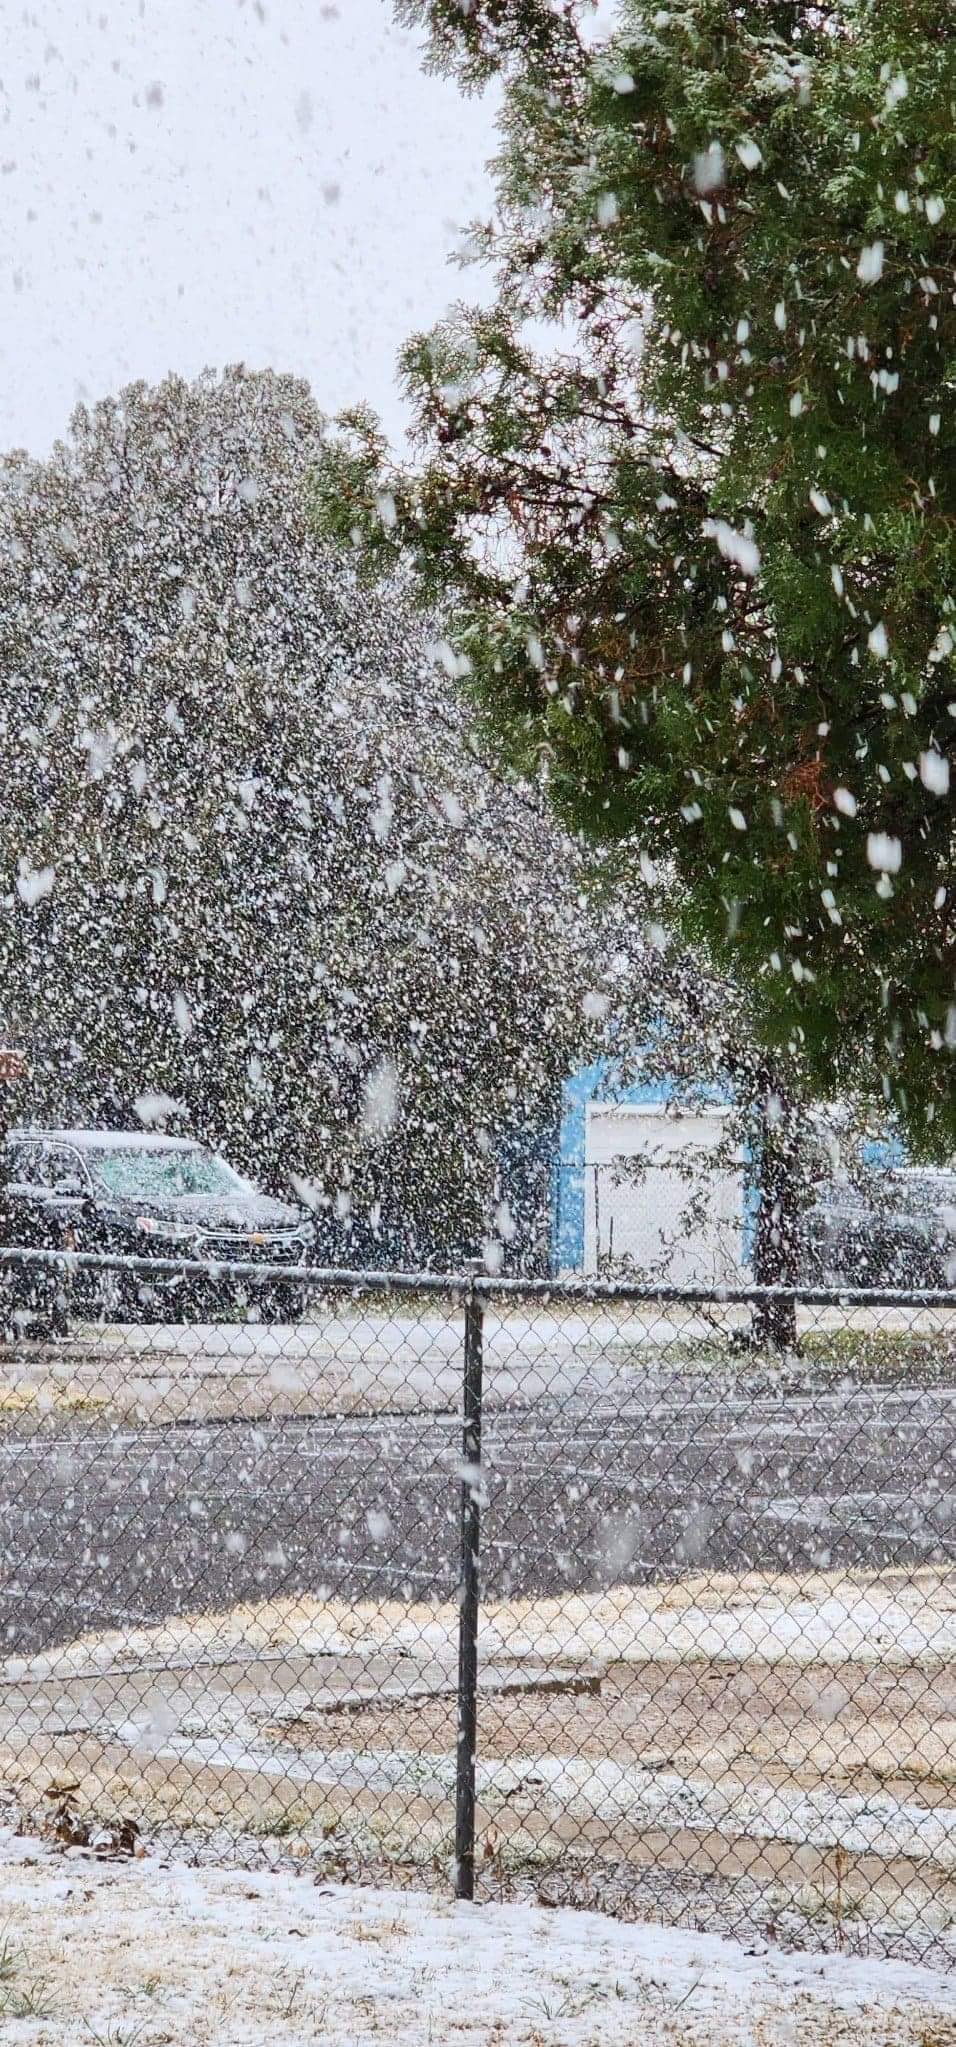 Heavy, wet snow falling in Hobbs Friday afternoon (25 November). The picture is courtesy of Sandra Rascon, via Jacob Riley and KLBK.